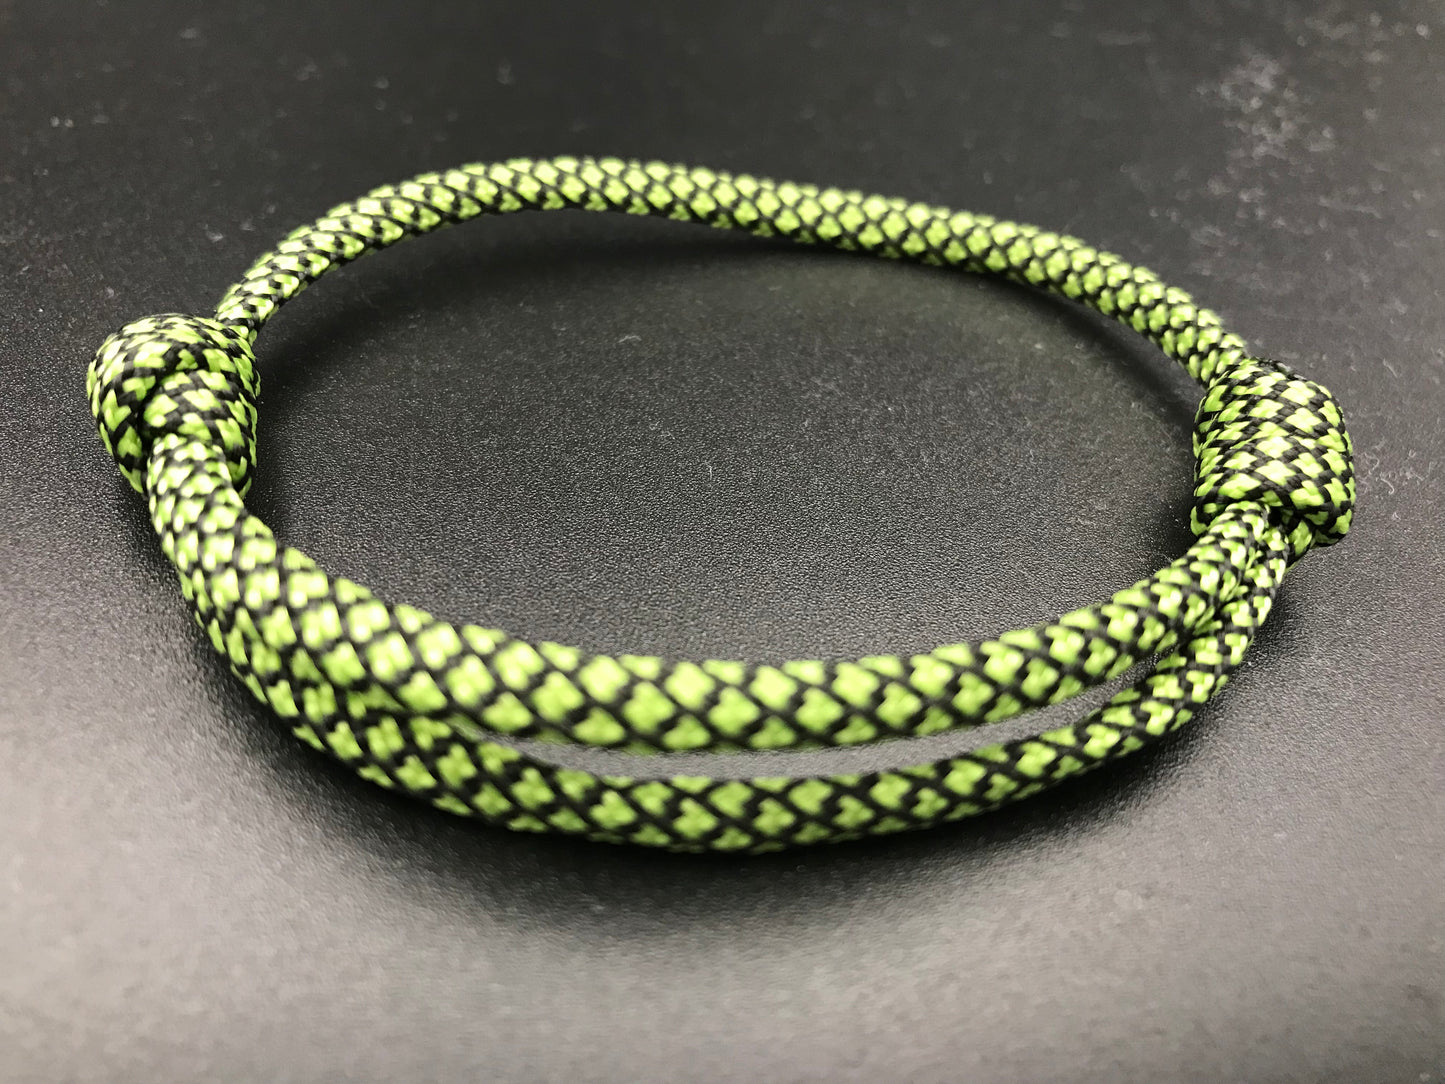 Paracord friendship bracelet in light green with a black diamond pattern light weight and adjustable 